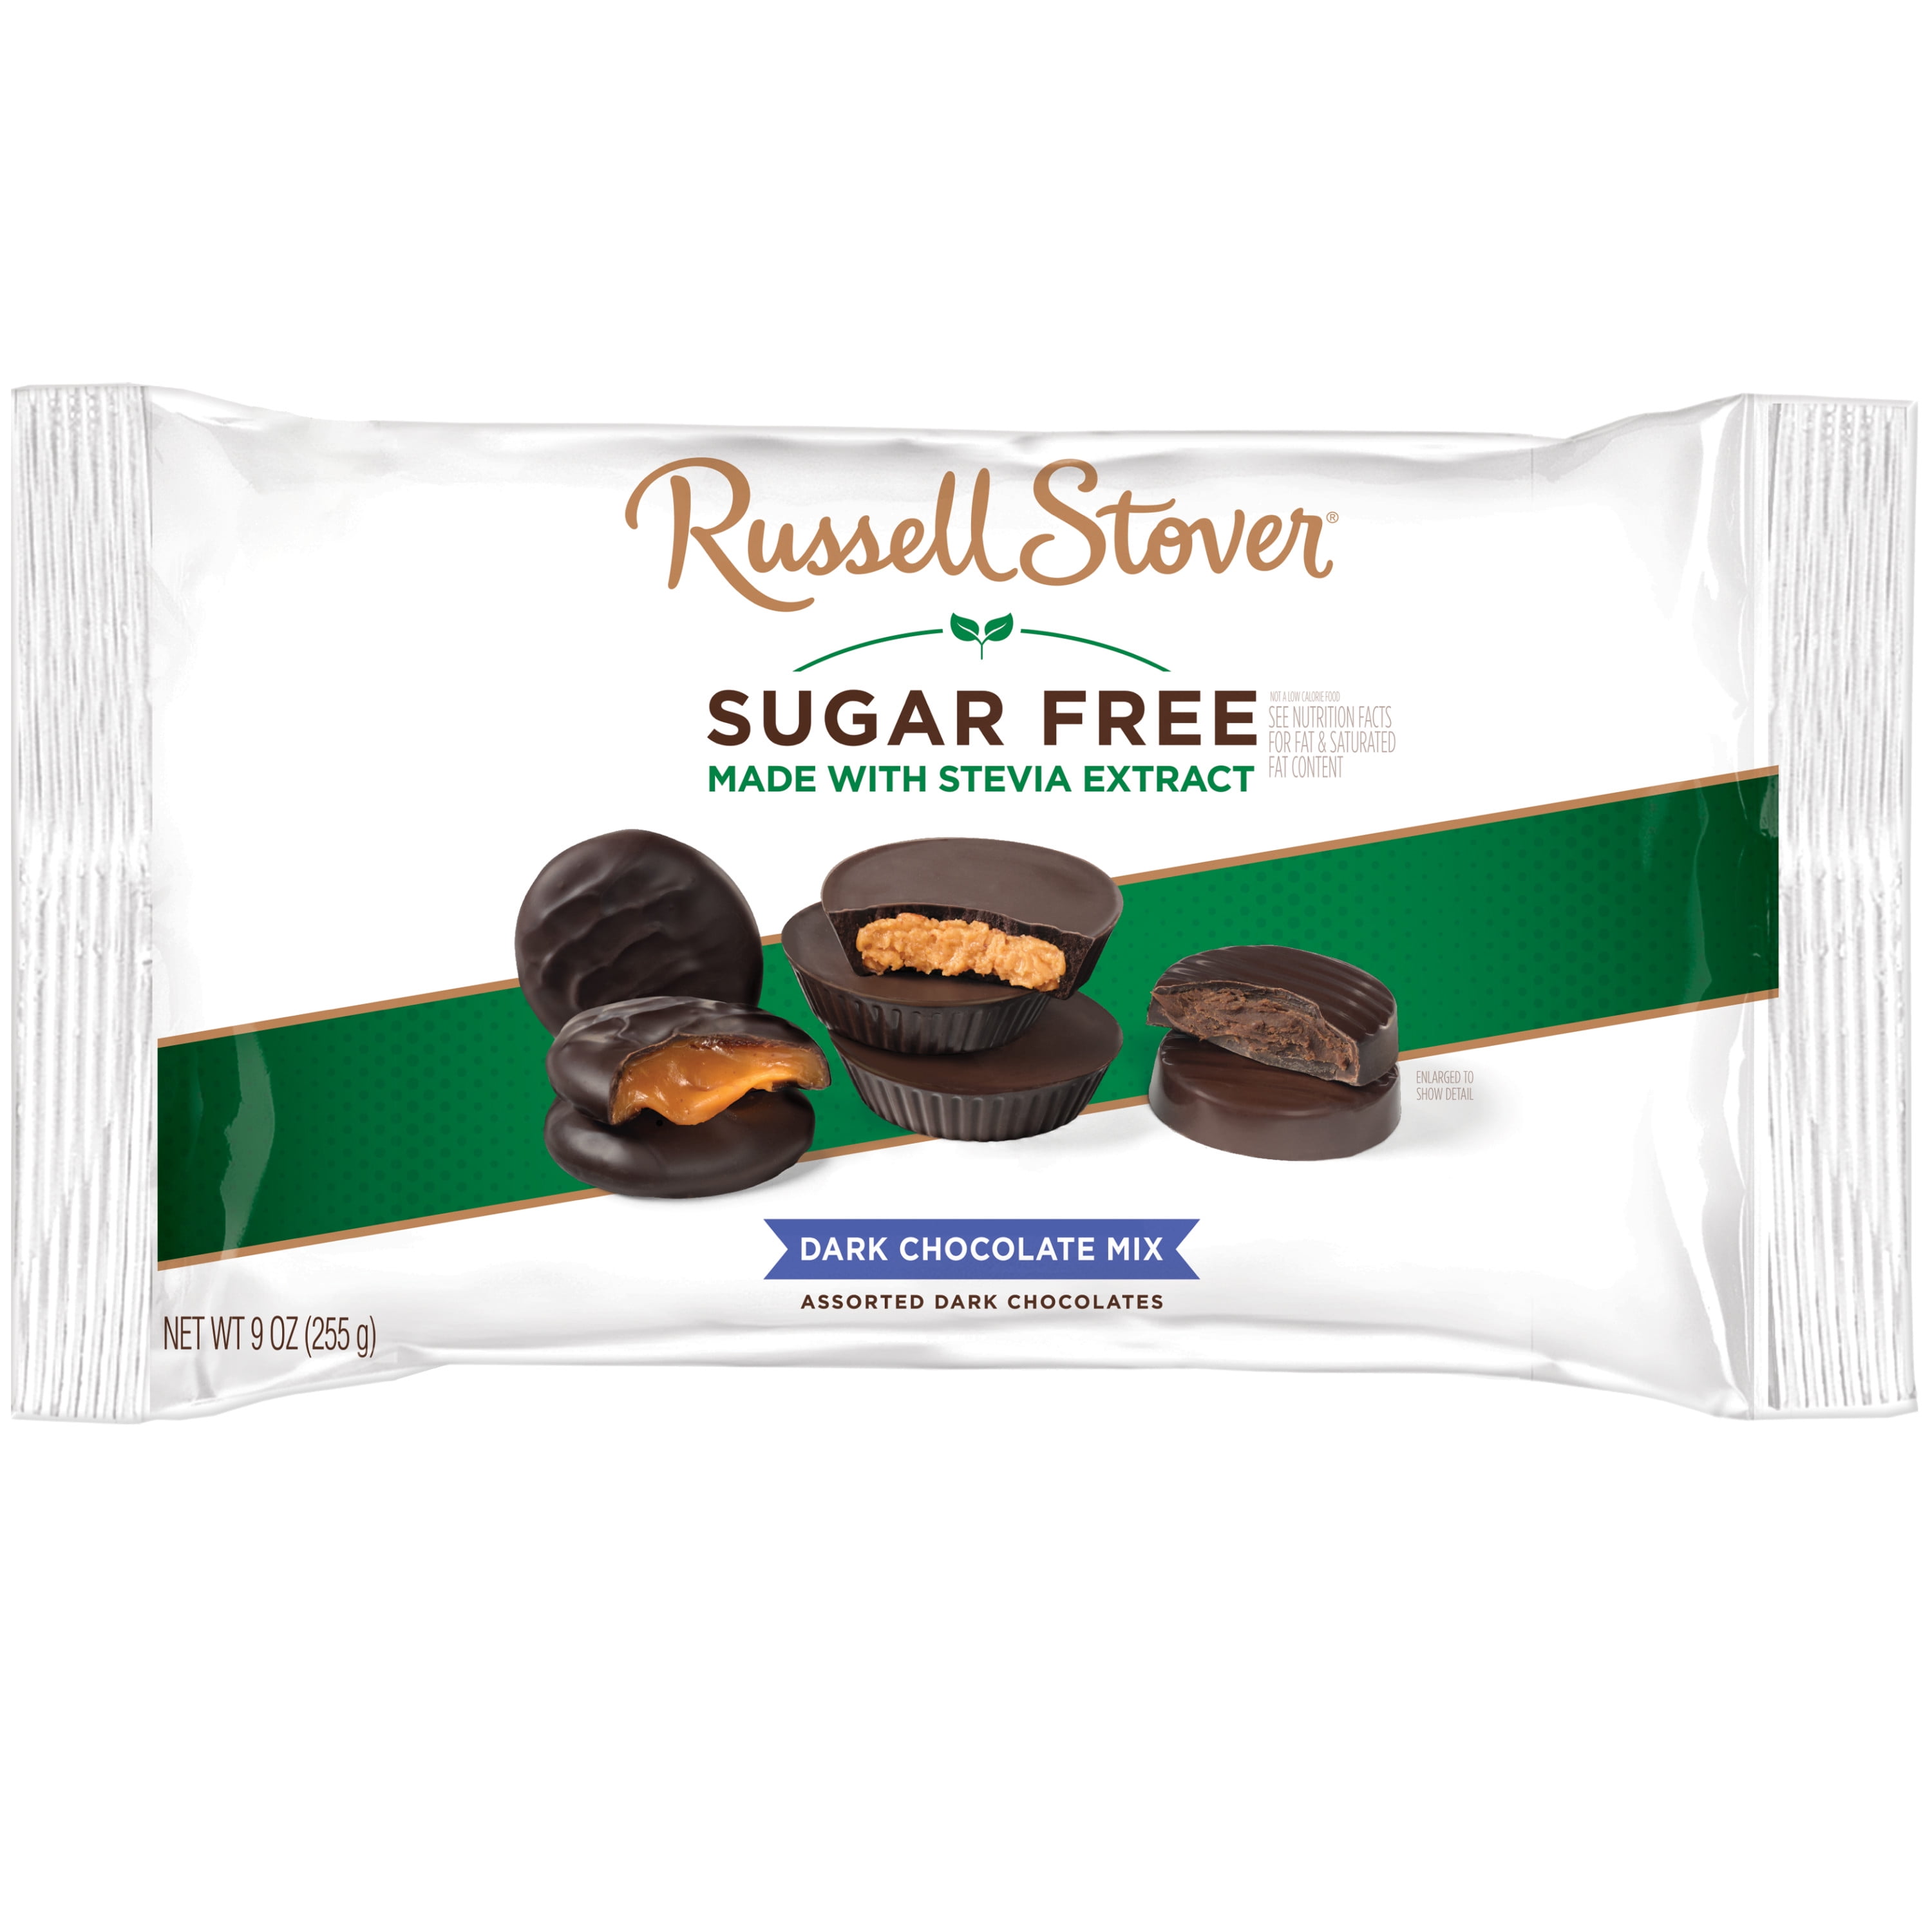 RUSSELL STOVER Sugar Free Dark Chocolate Candy, 3 oz. bag (≈ 6 pieces)